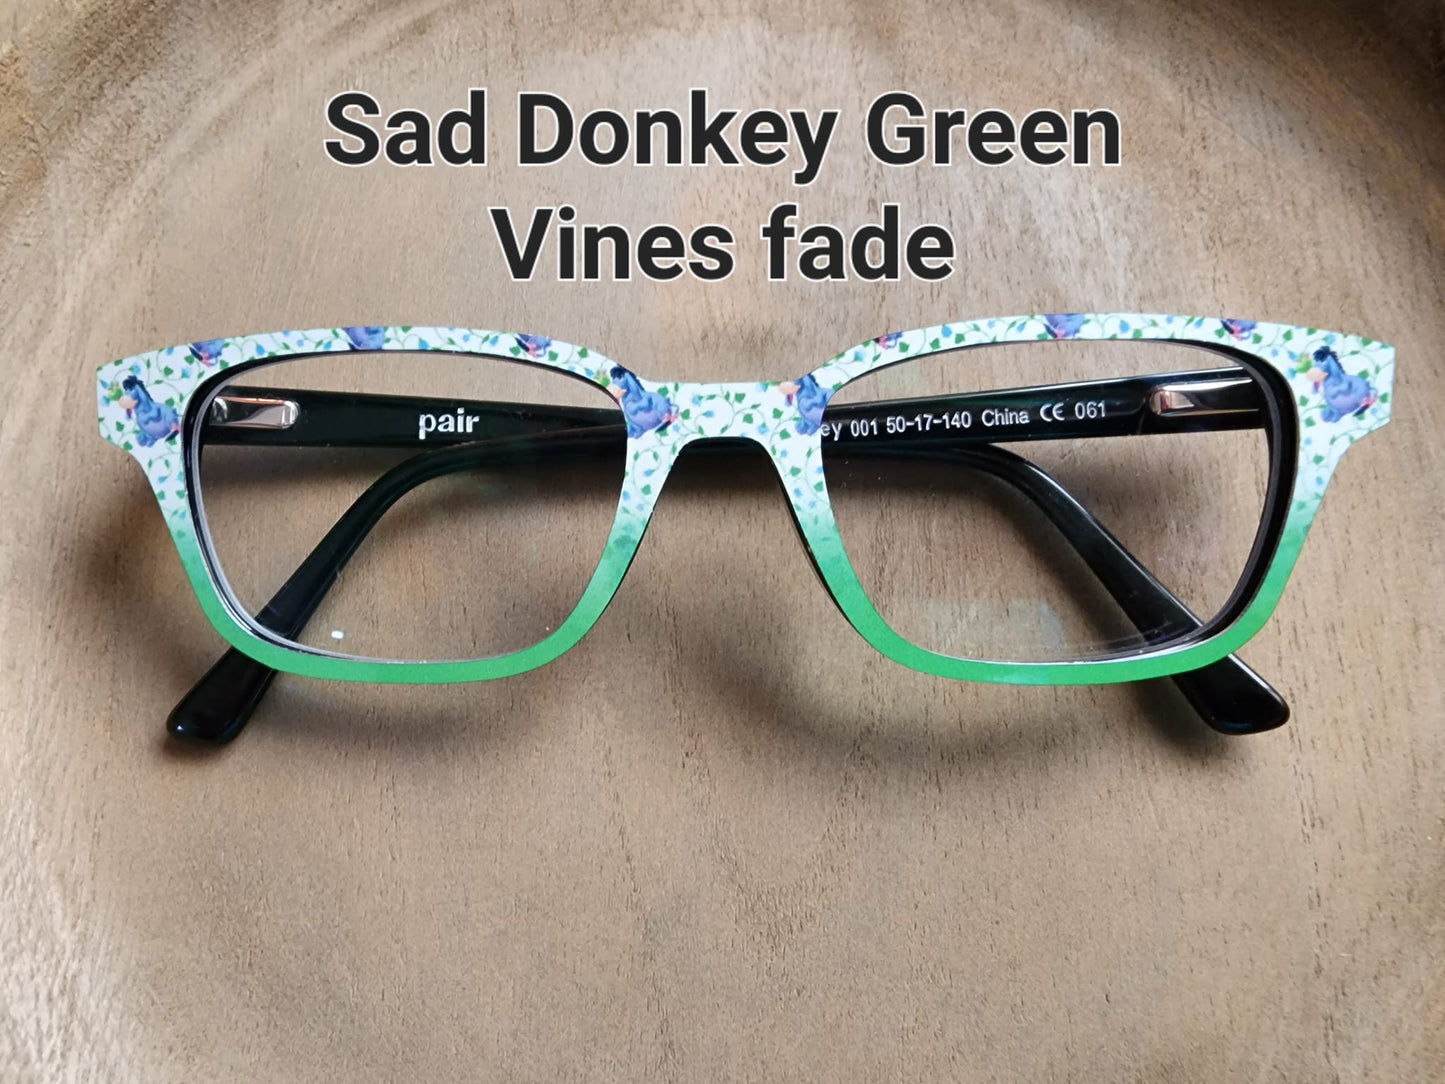 SAD DONKEY GREEN VINES FADE Eyewear Frame Toppers COMES WITH MAGNETS